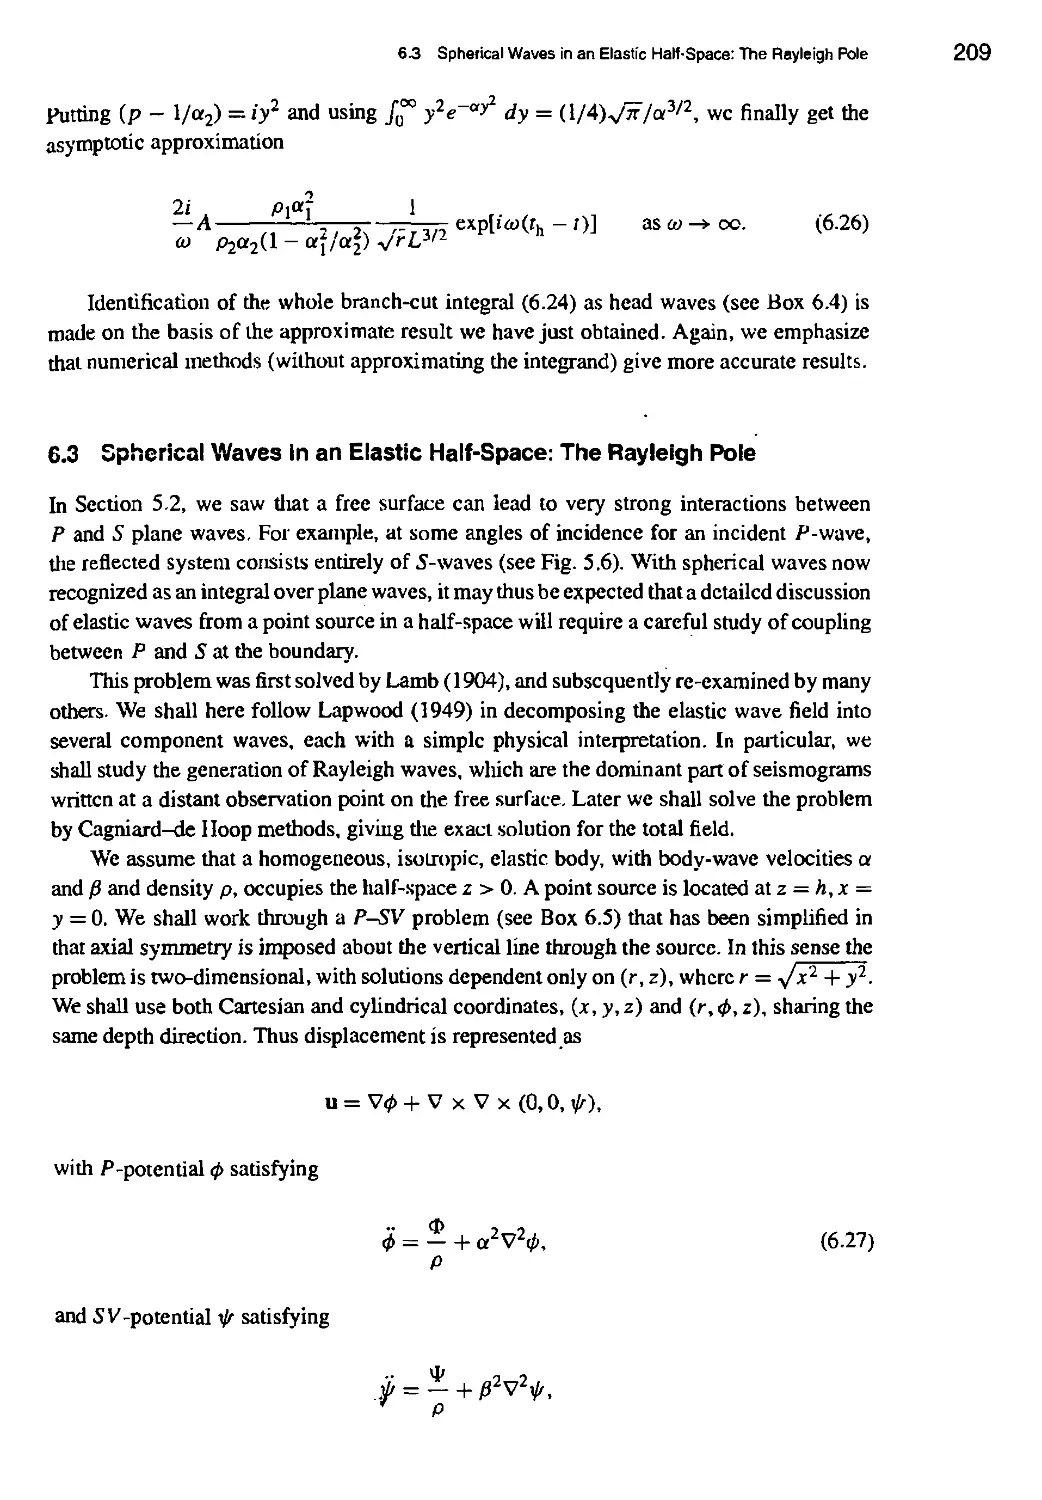 6.3 Spherical Waves in an Elastic Half-Space: The Rayleigh Pole